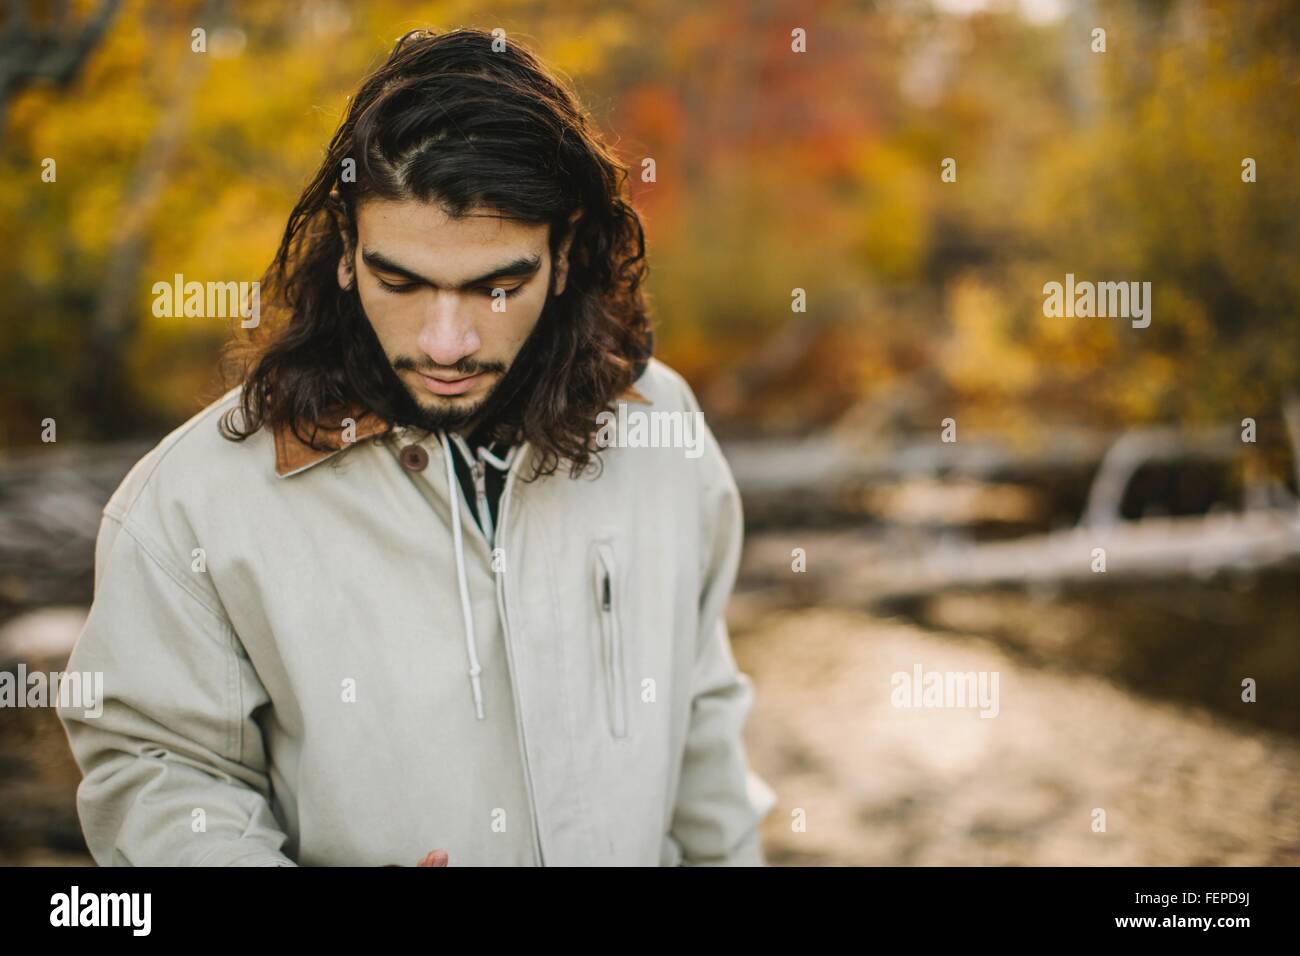 Young man, in rural environment, looking down Stock Photo